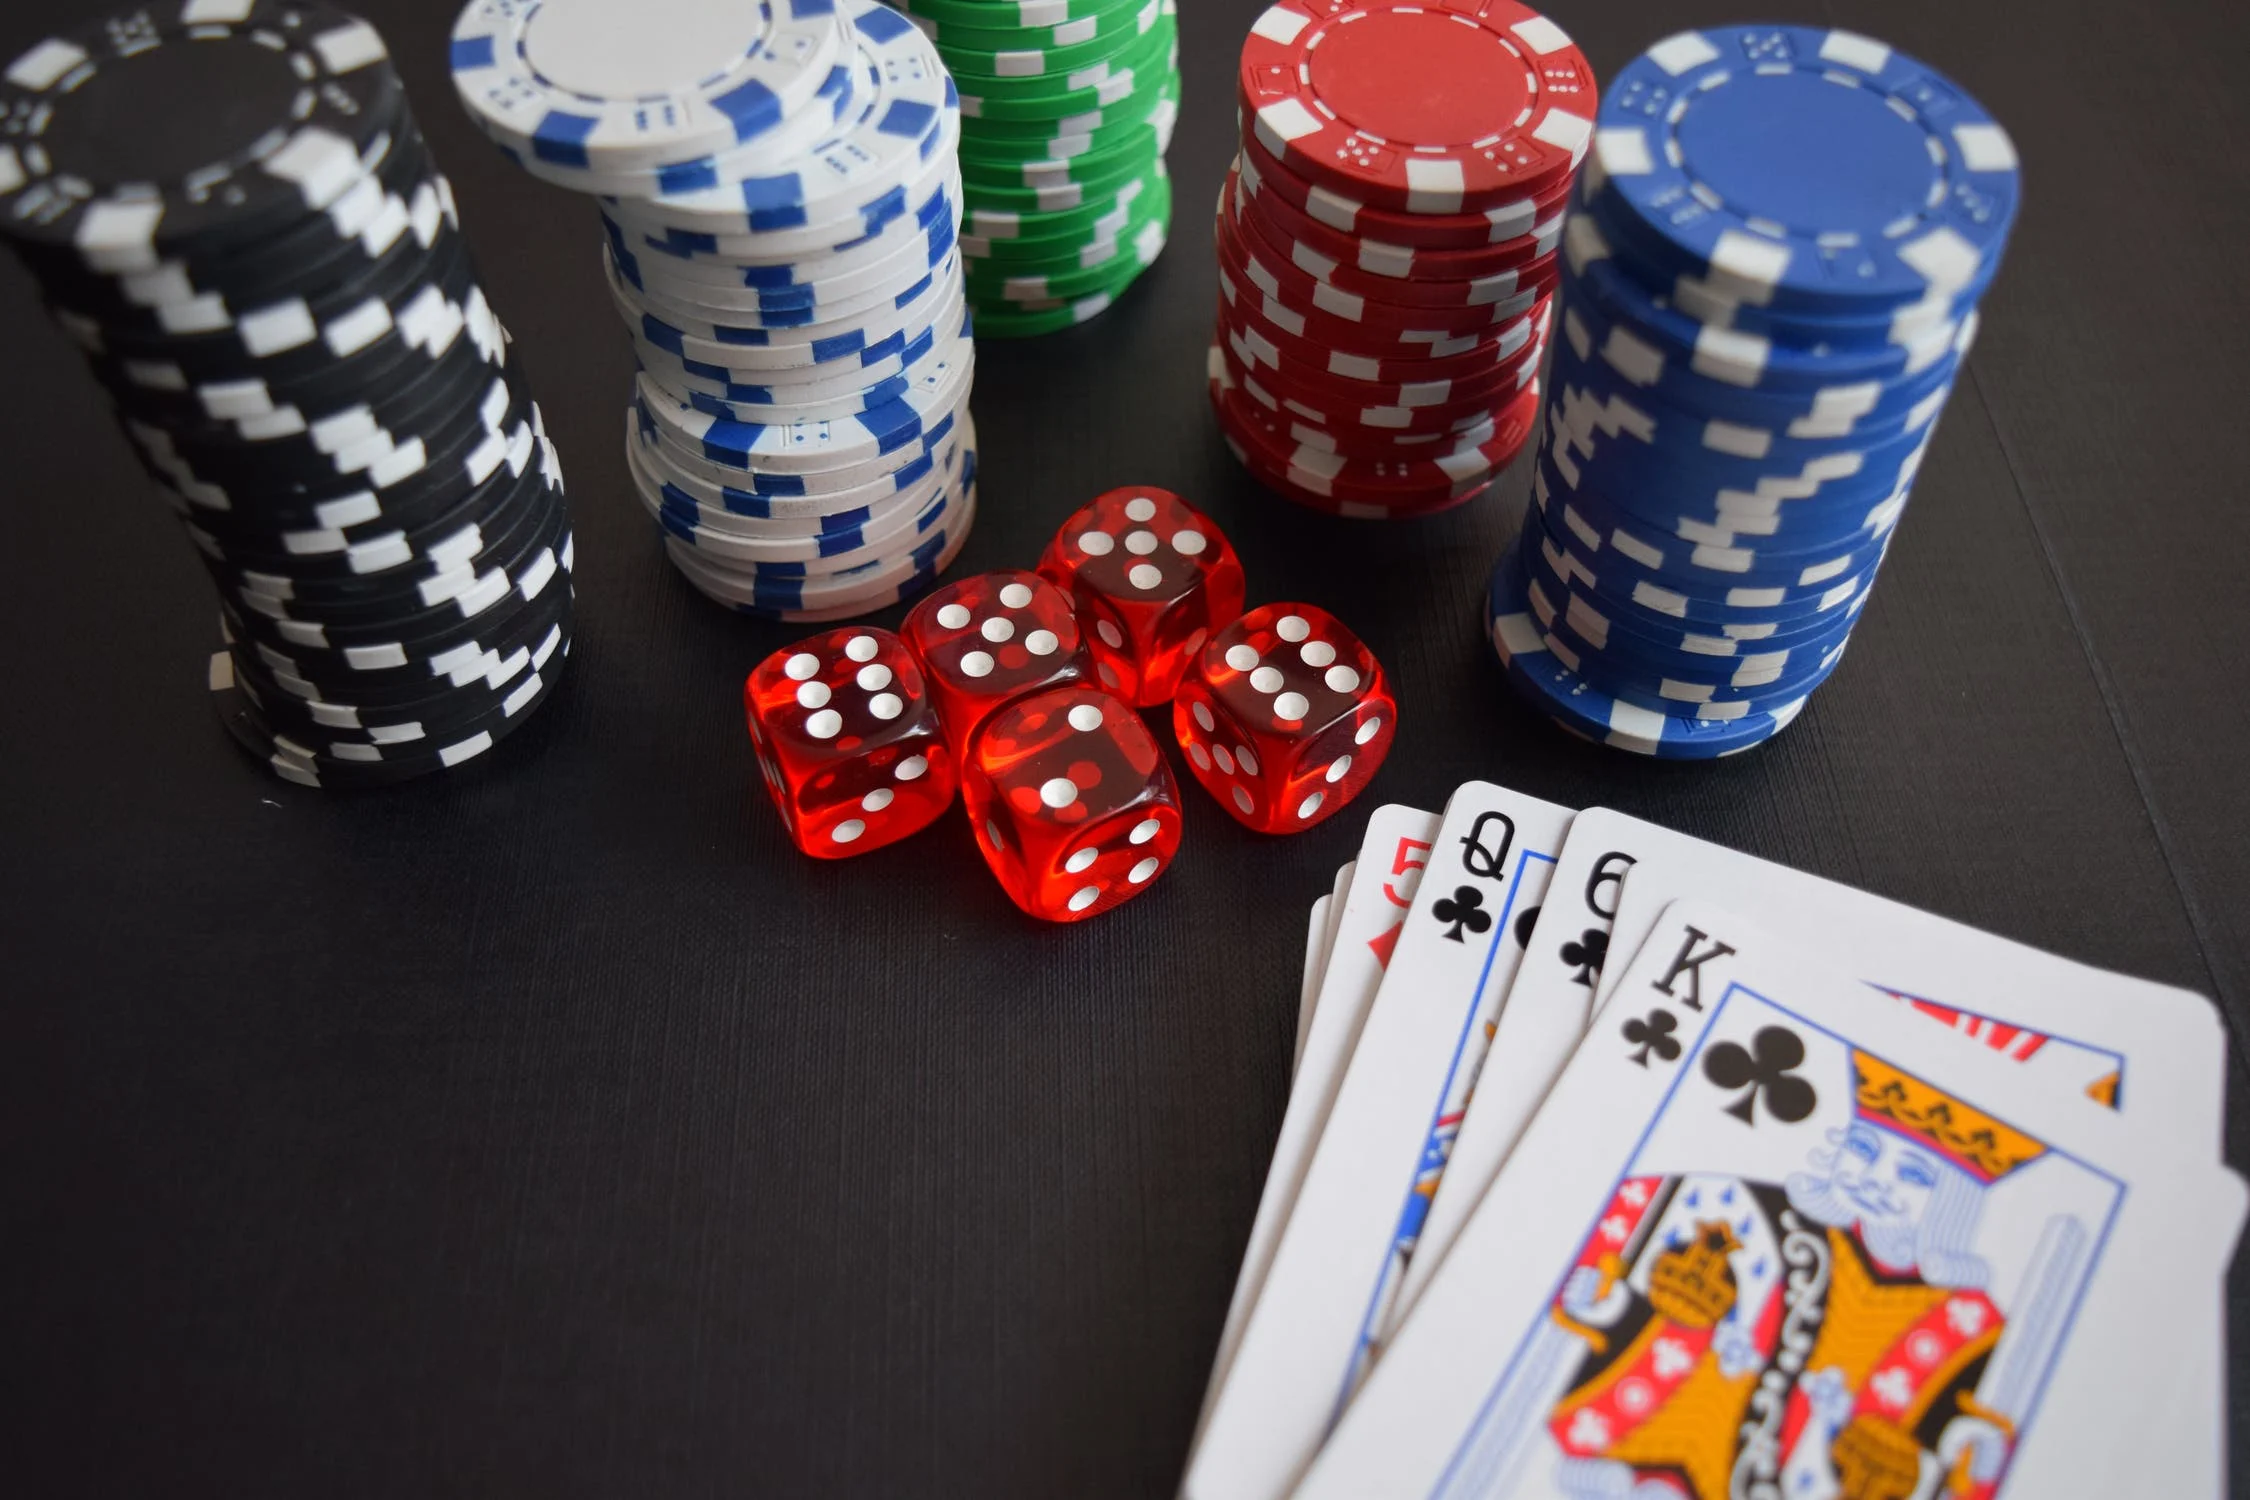 Few Tips To Play Safely At Casino